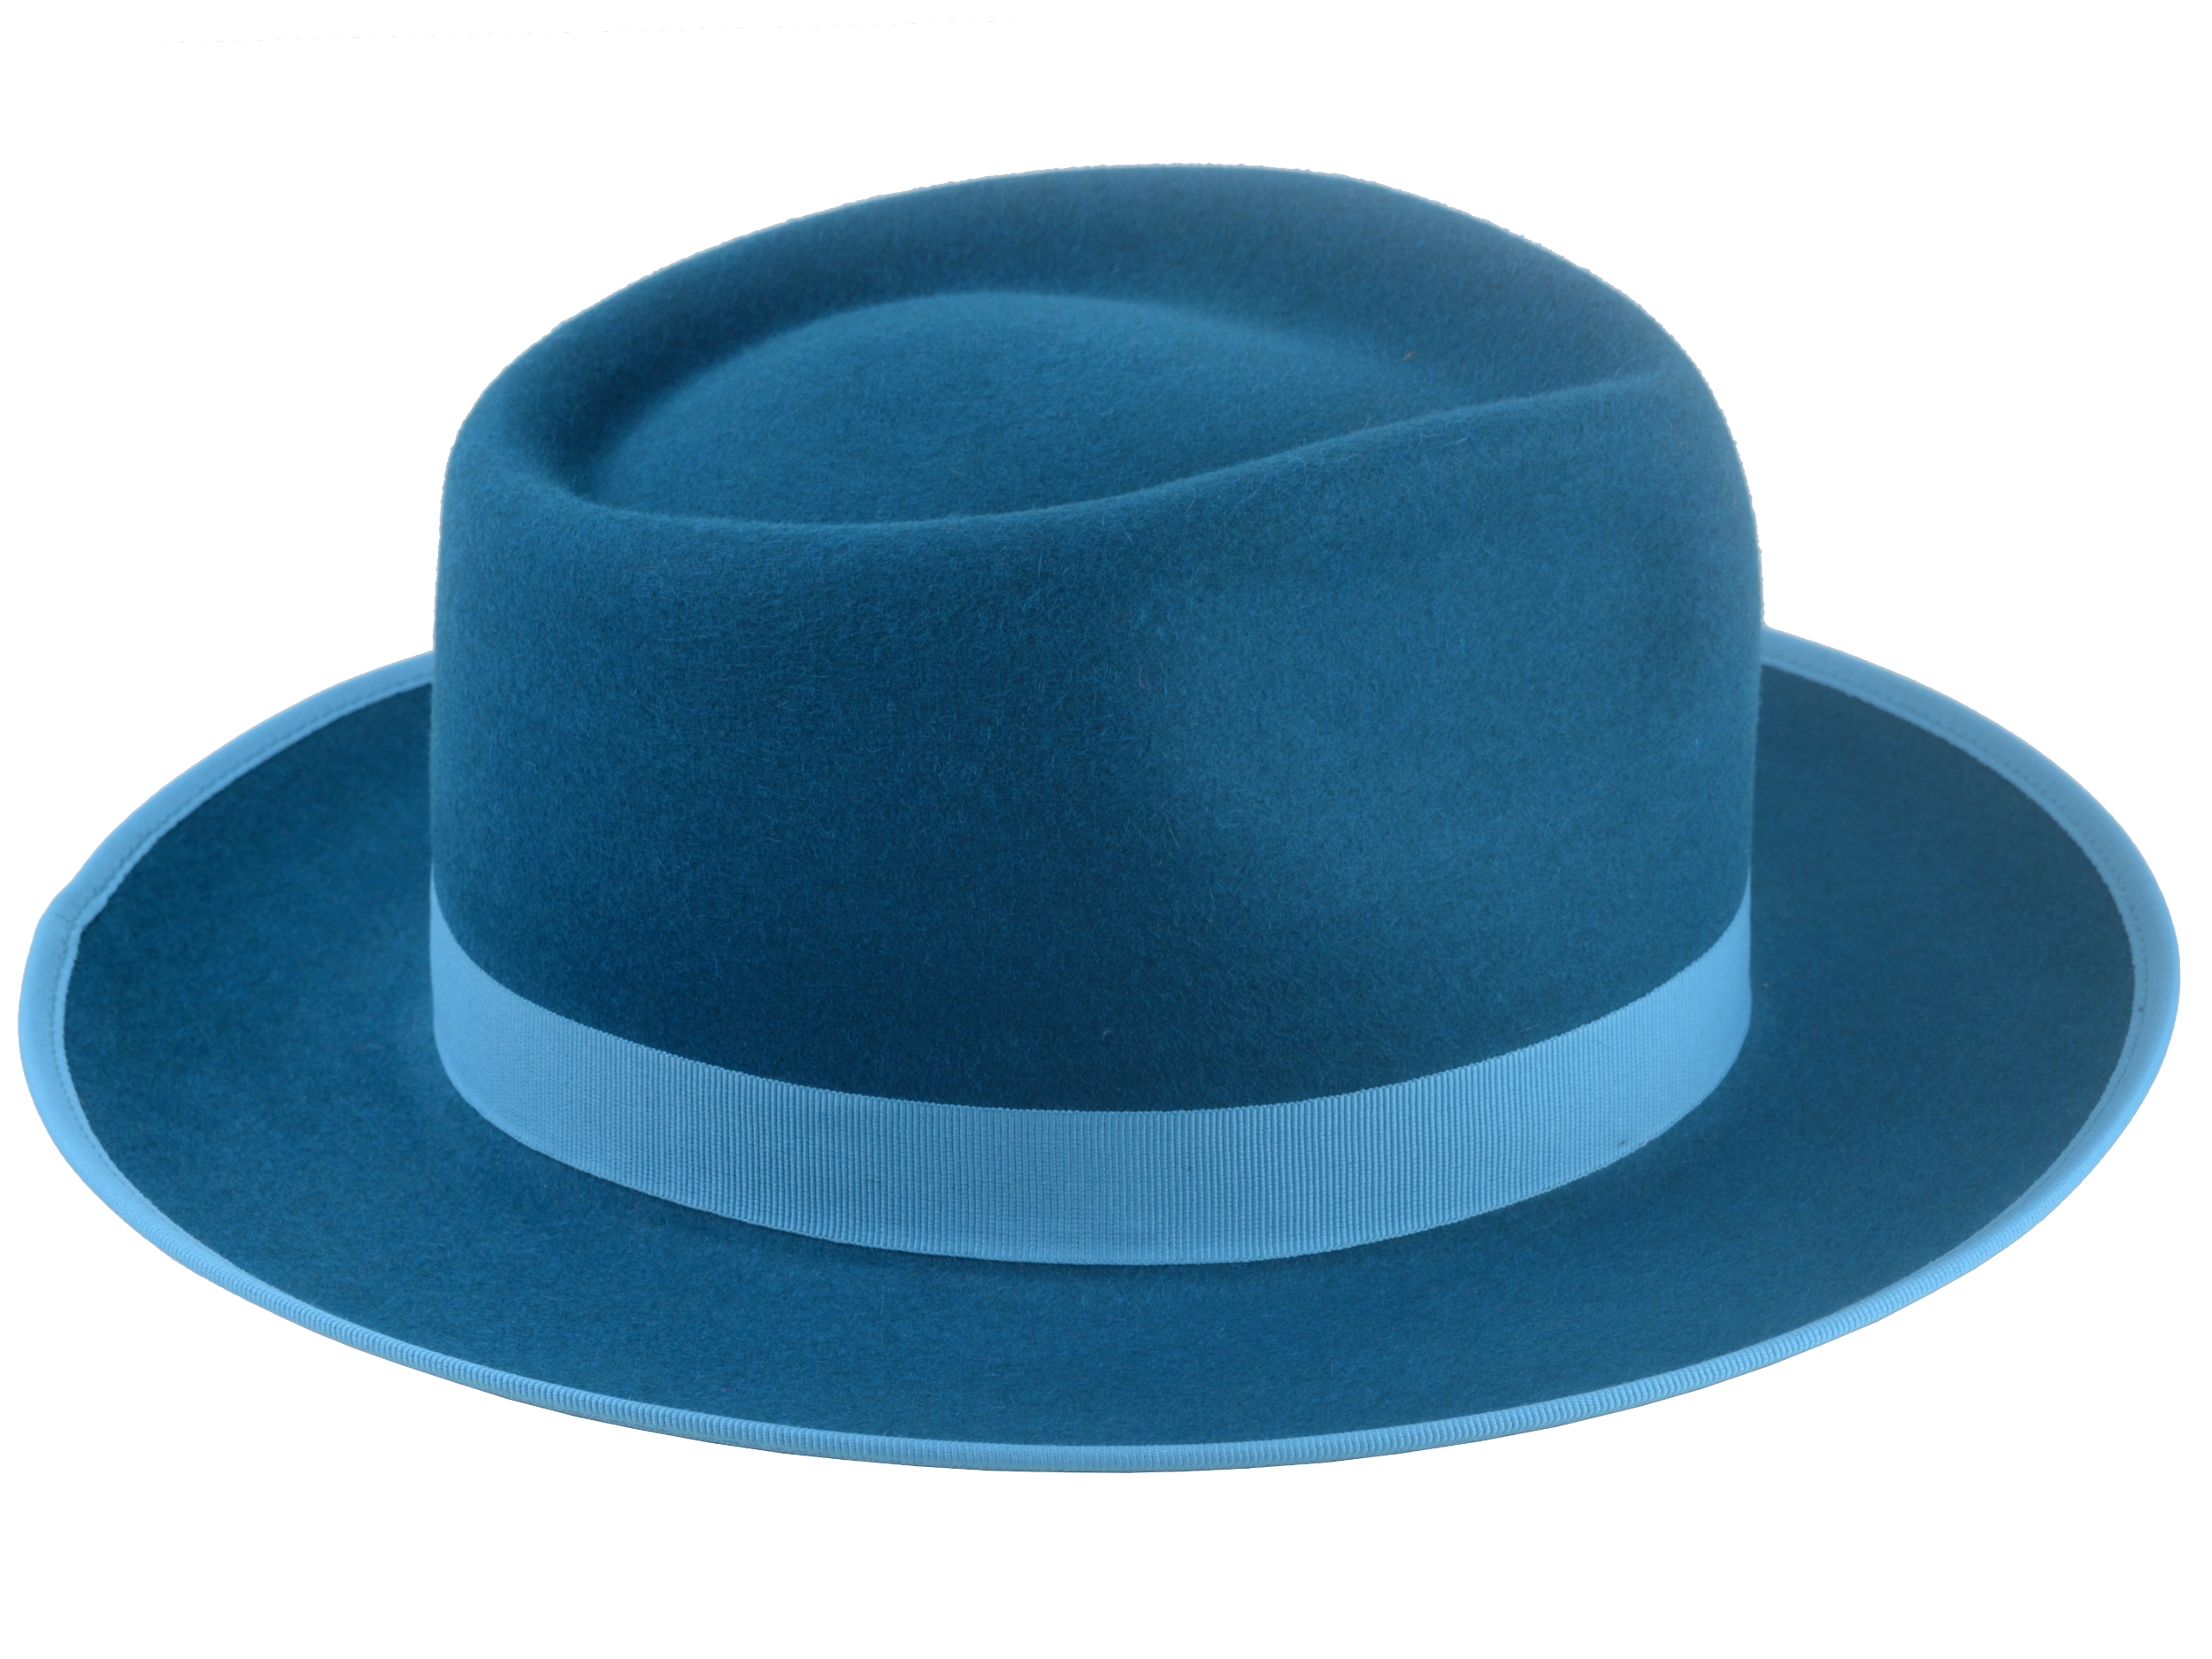 Image showcasing the smooth surface finish of the Equinox dark teal fedora hat